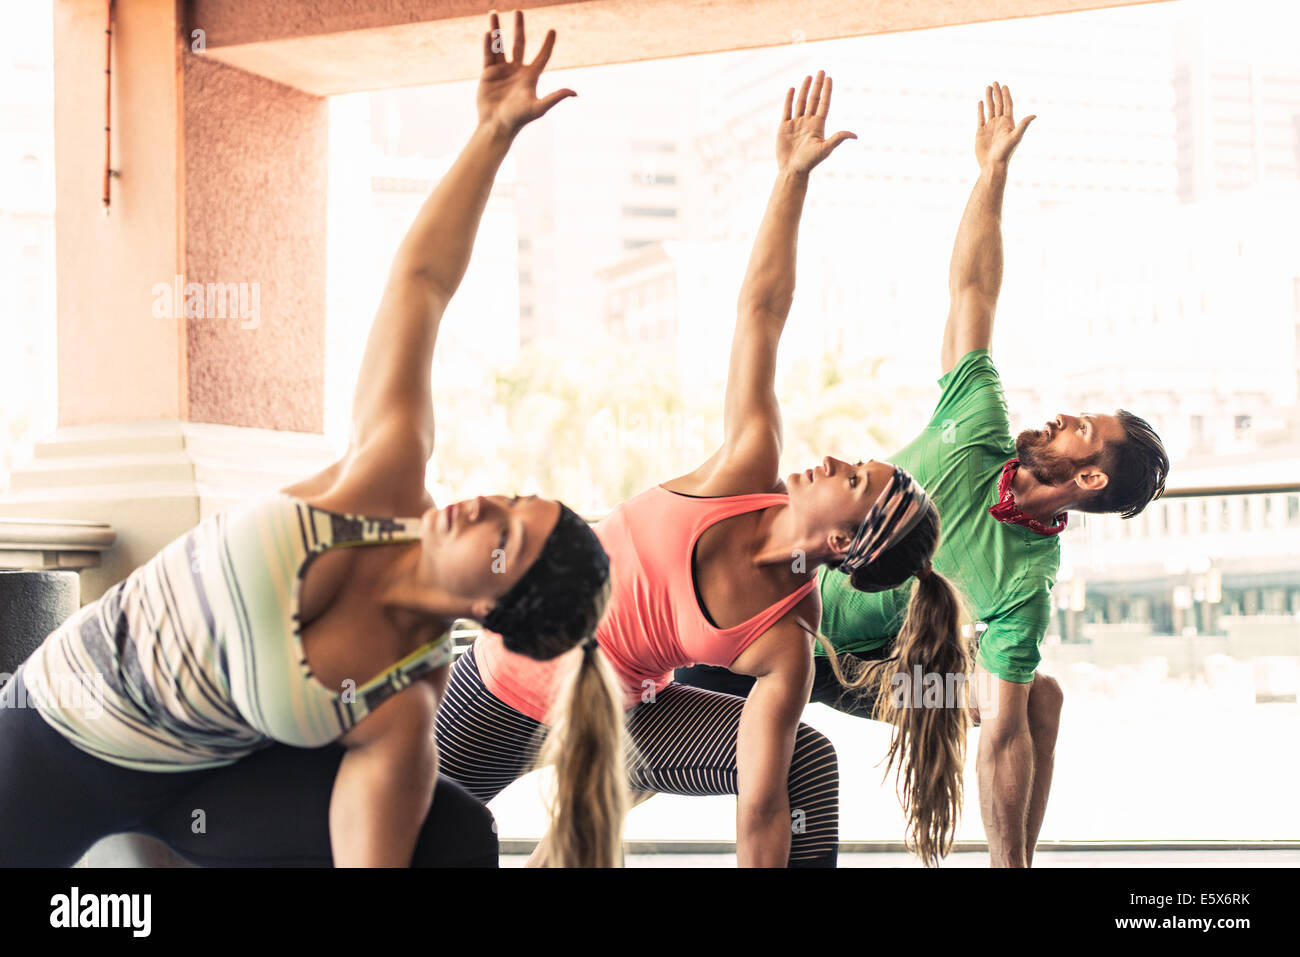 Group of young adults doing yoga Stock Photo